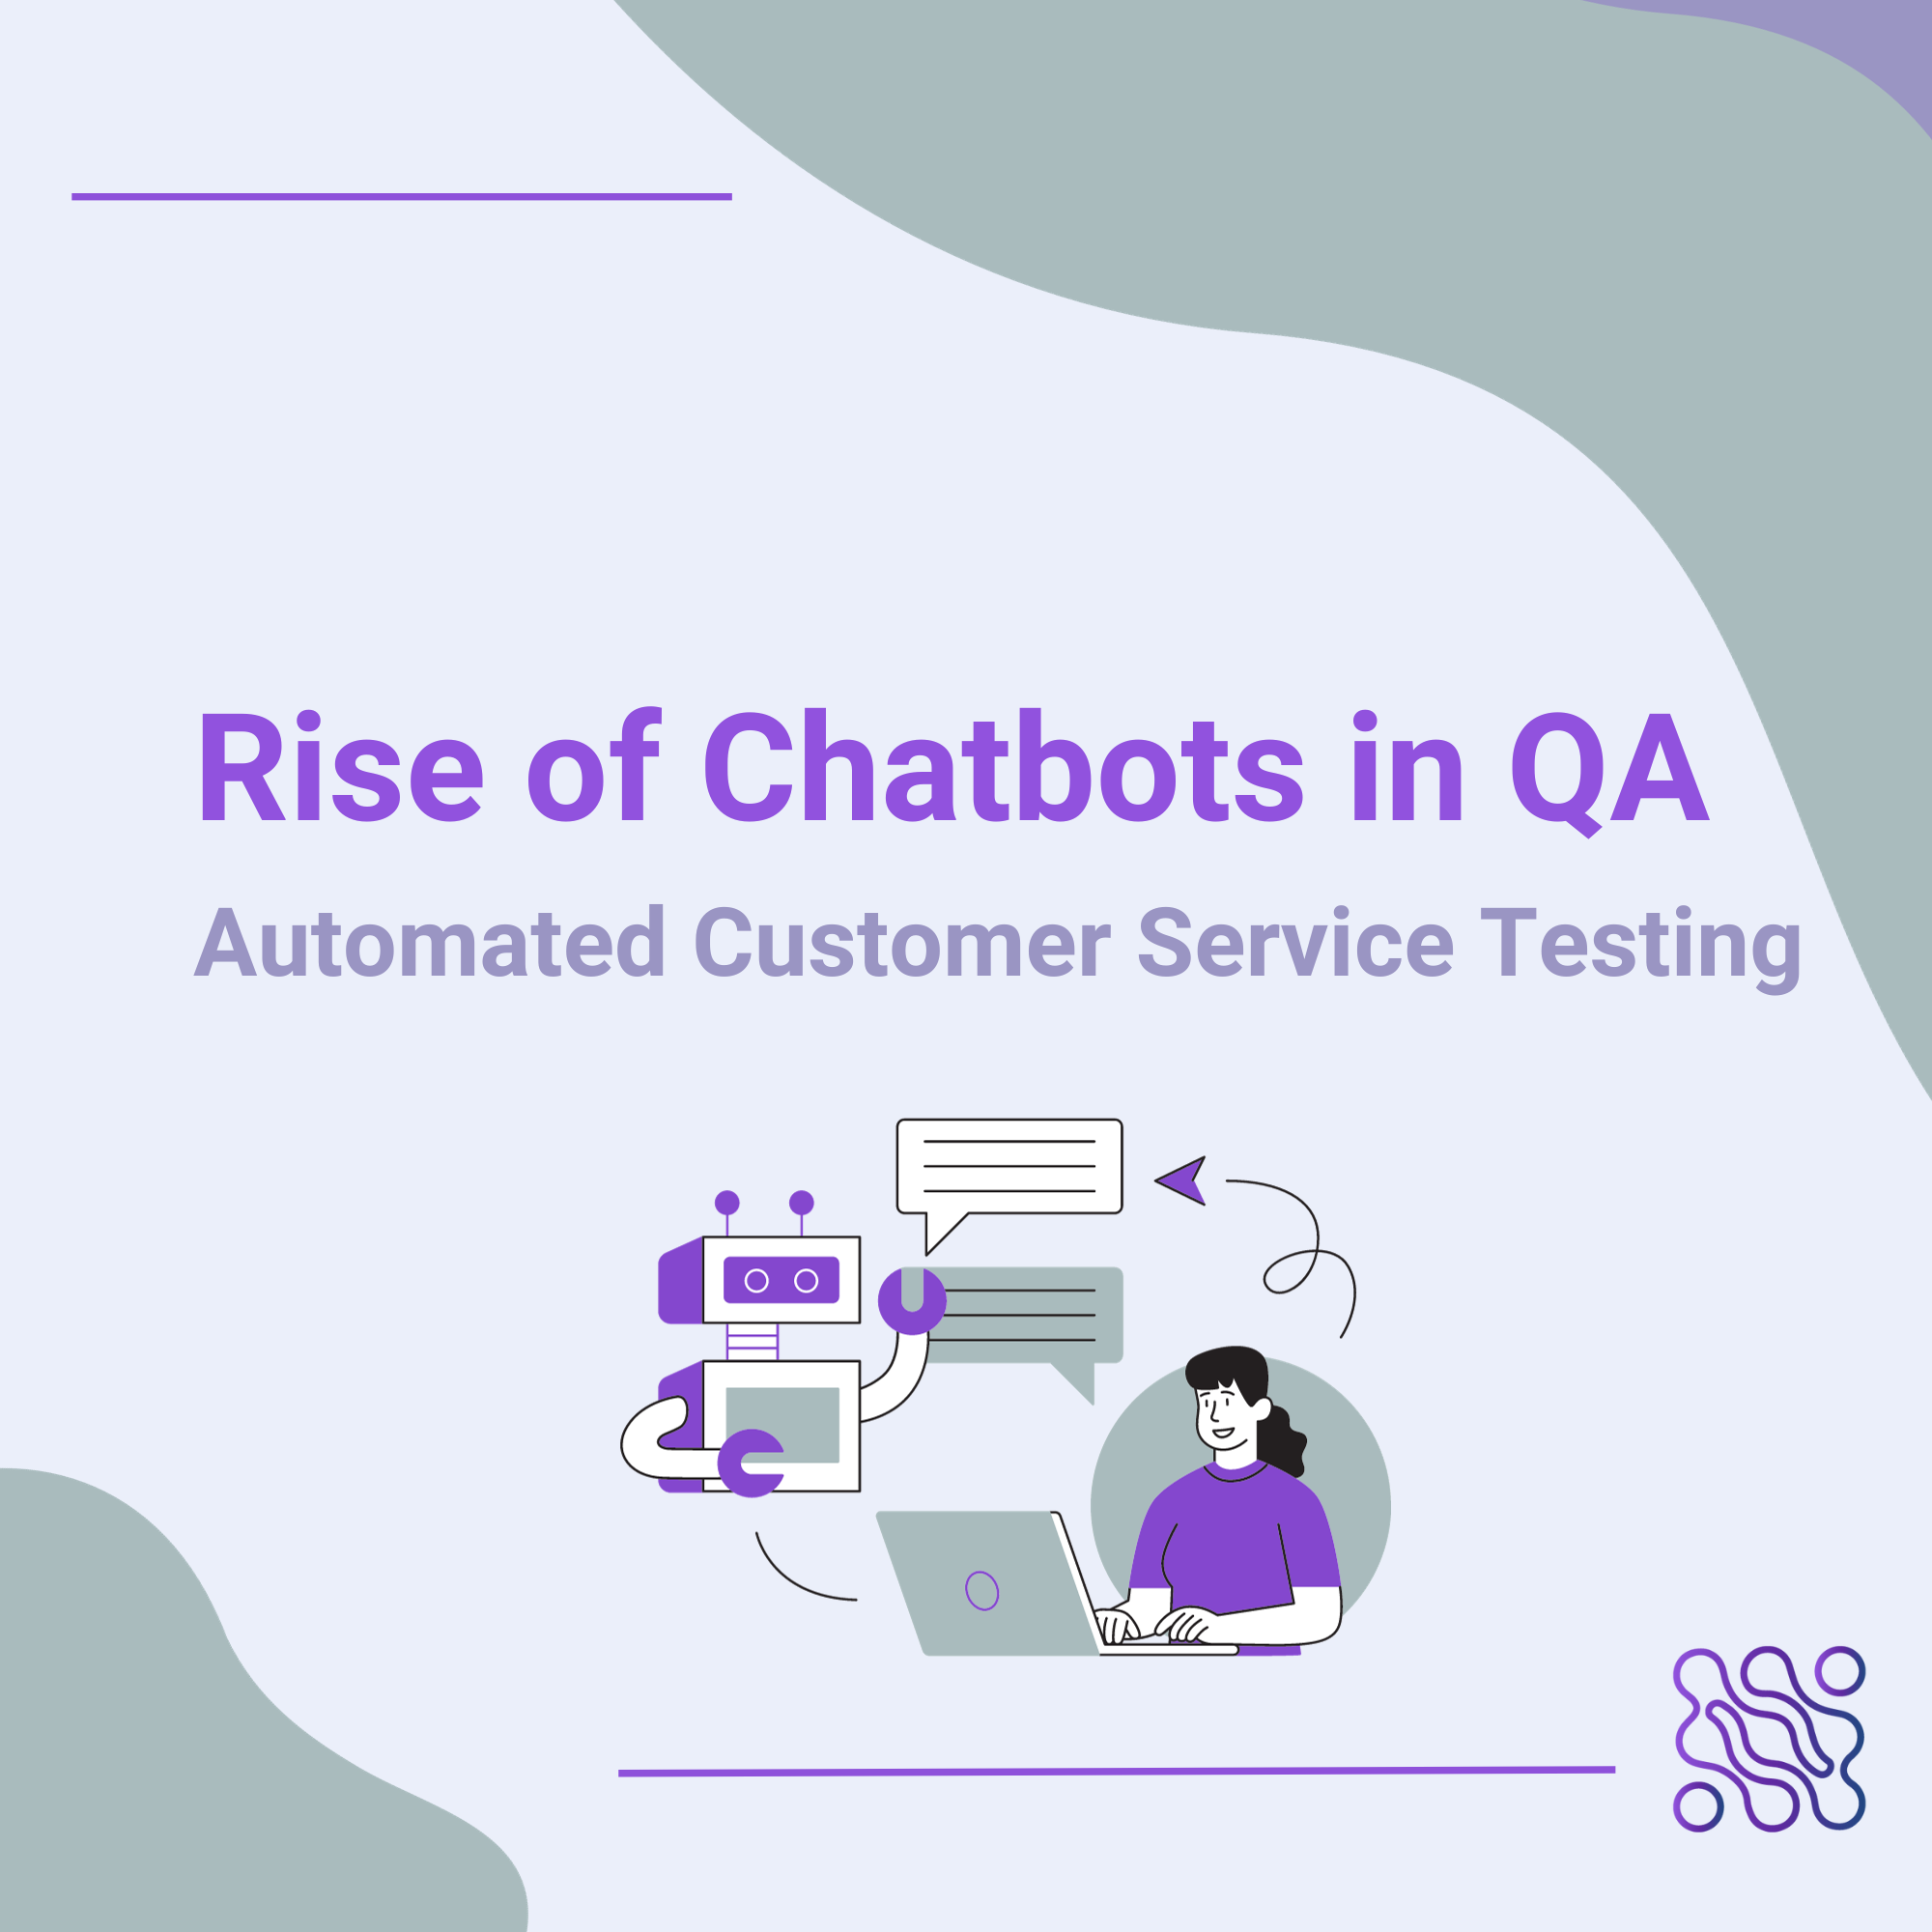 The Rise of Chatbots in QA Automated Customer Service Testing